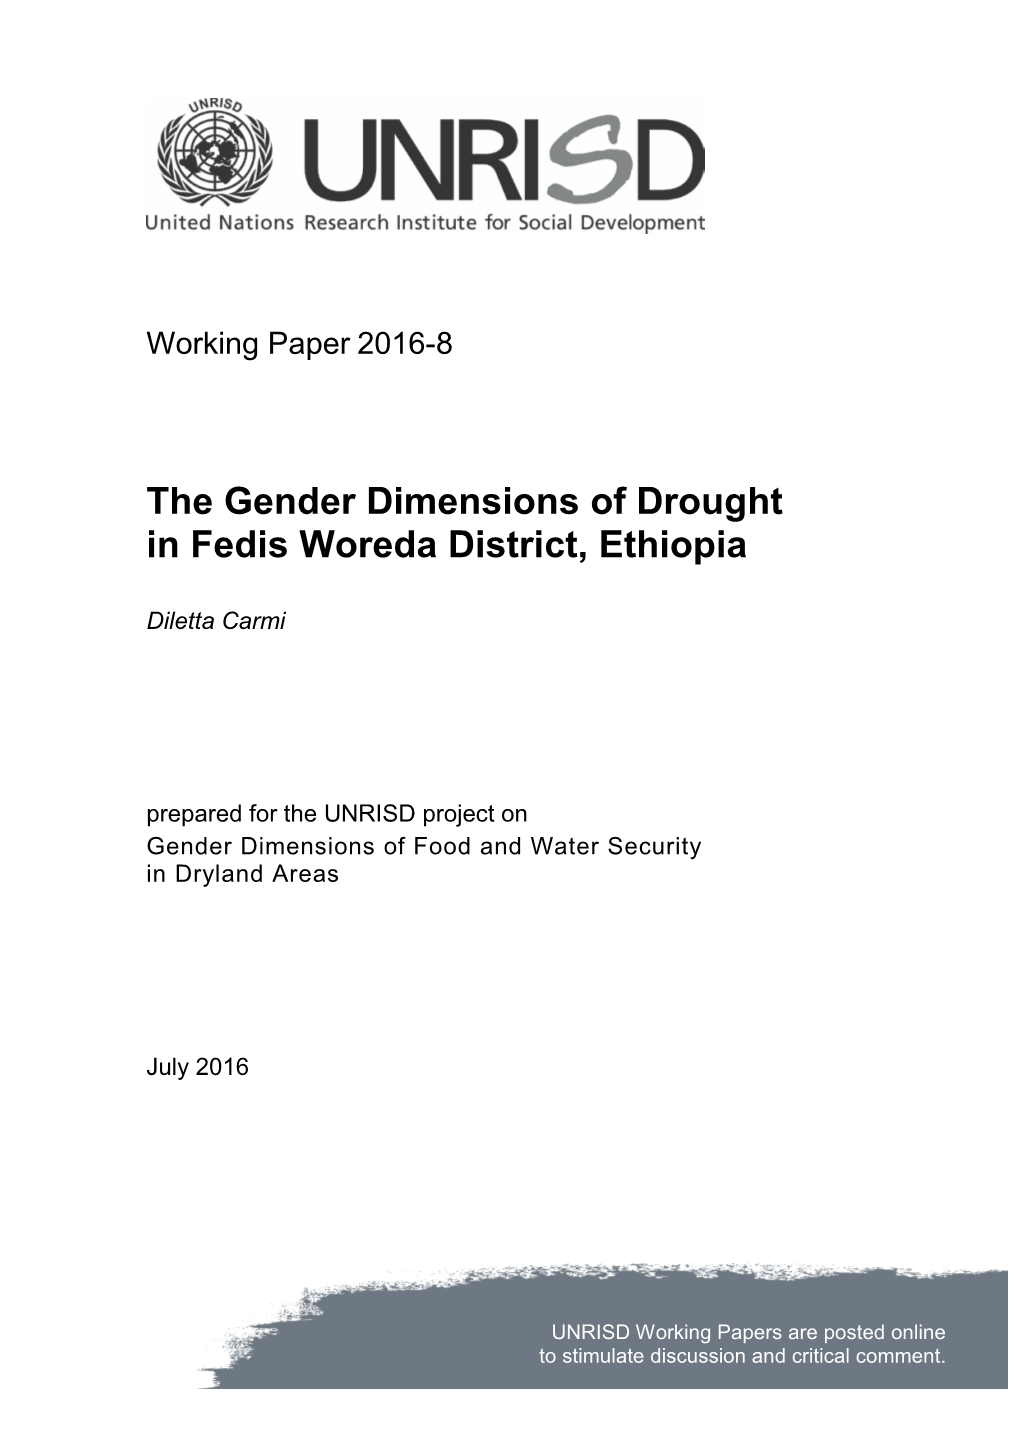 The Gender Dimensions of Drought in Fedis Woreda District, Ethiopia